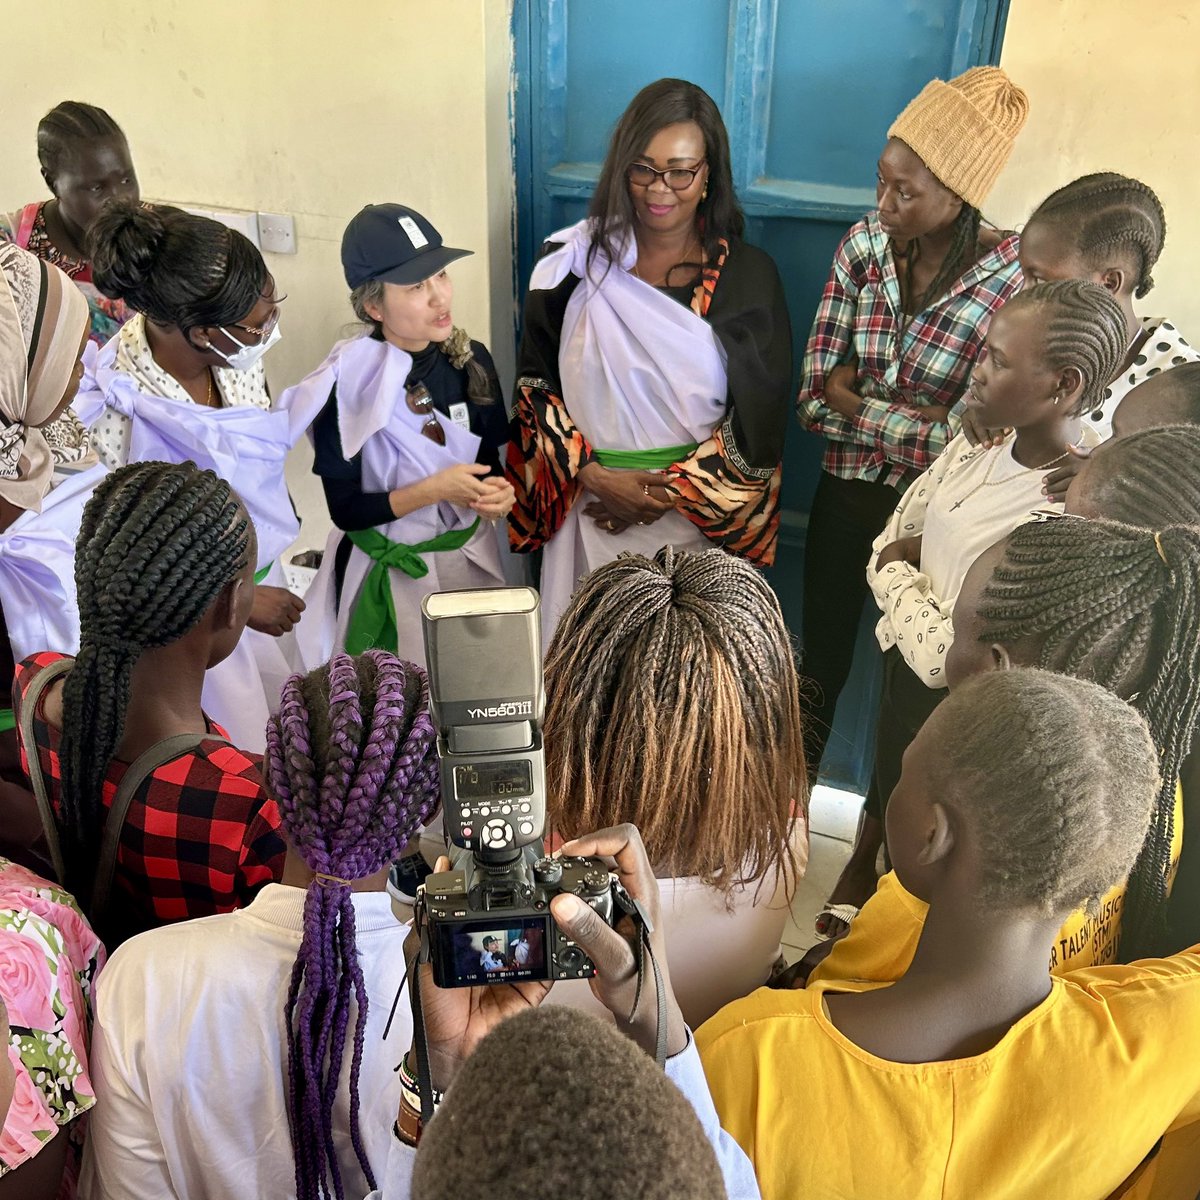 In Malakal 🇸🇸, young women shared their challenges at home and in society with me.

Extremely important to provide space for them to participate in peacebuilding processes.

#WomenPeaceSecurity #WPS